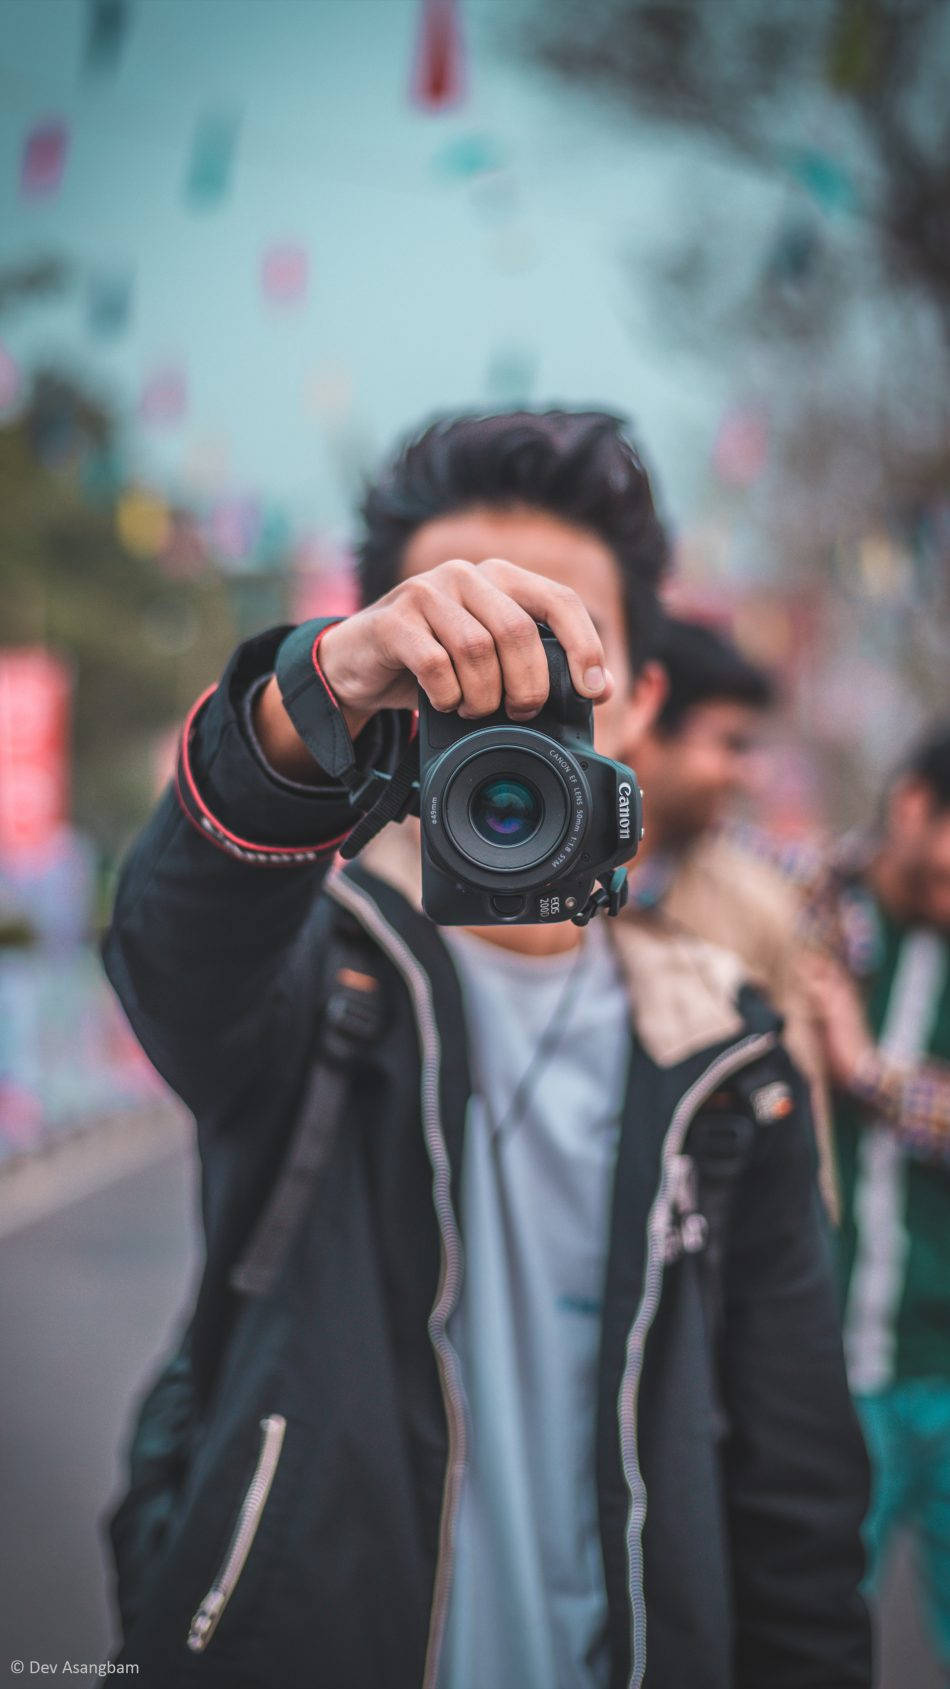 Hd Photography Of A Man Holding A Camera